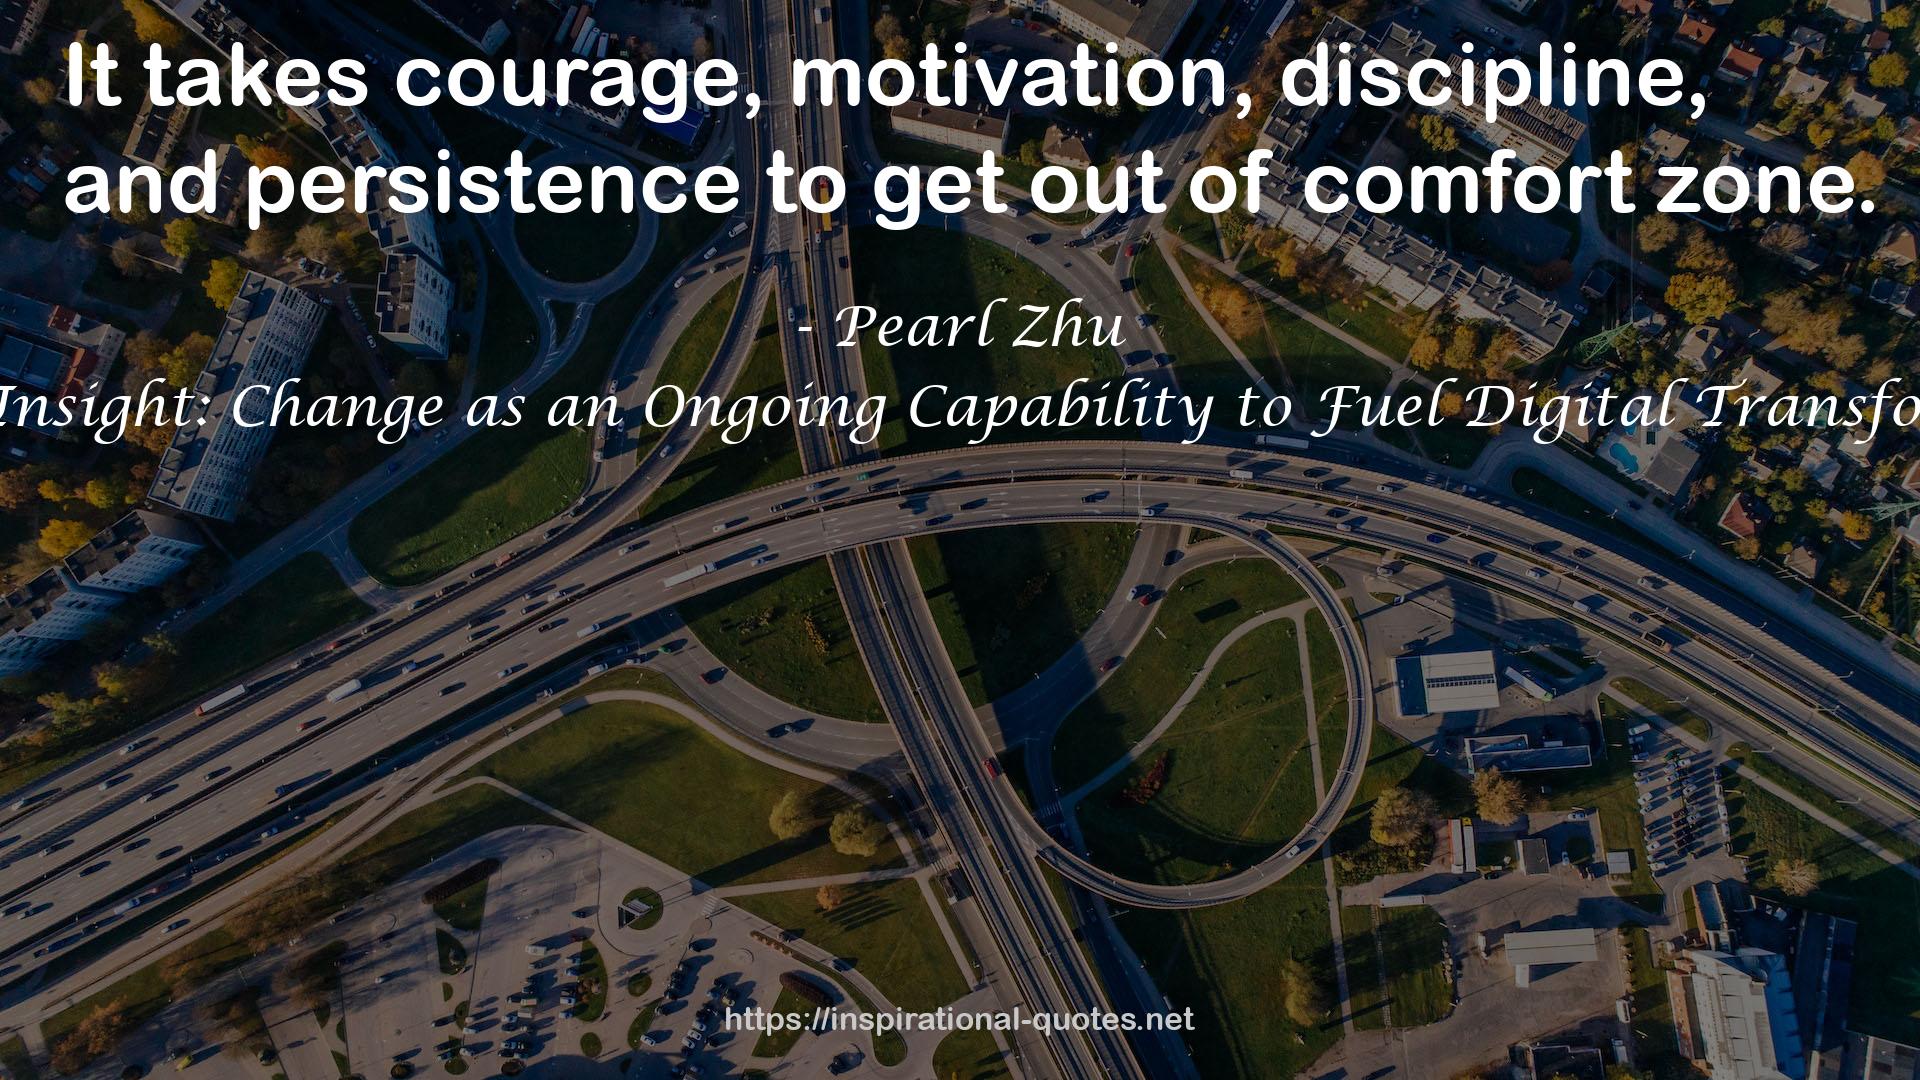 Change Insight: Change as an Ongoing Capability to Fuel Digital Transformation QUOTES